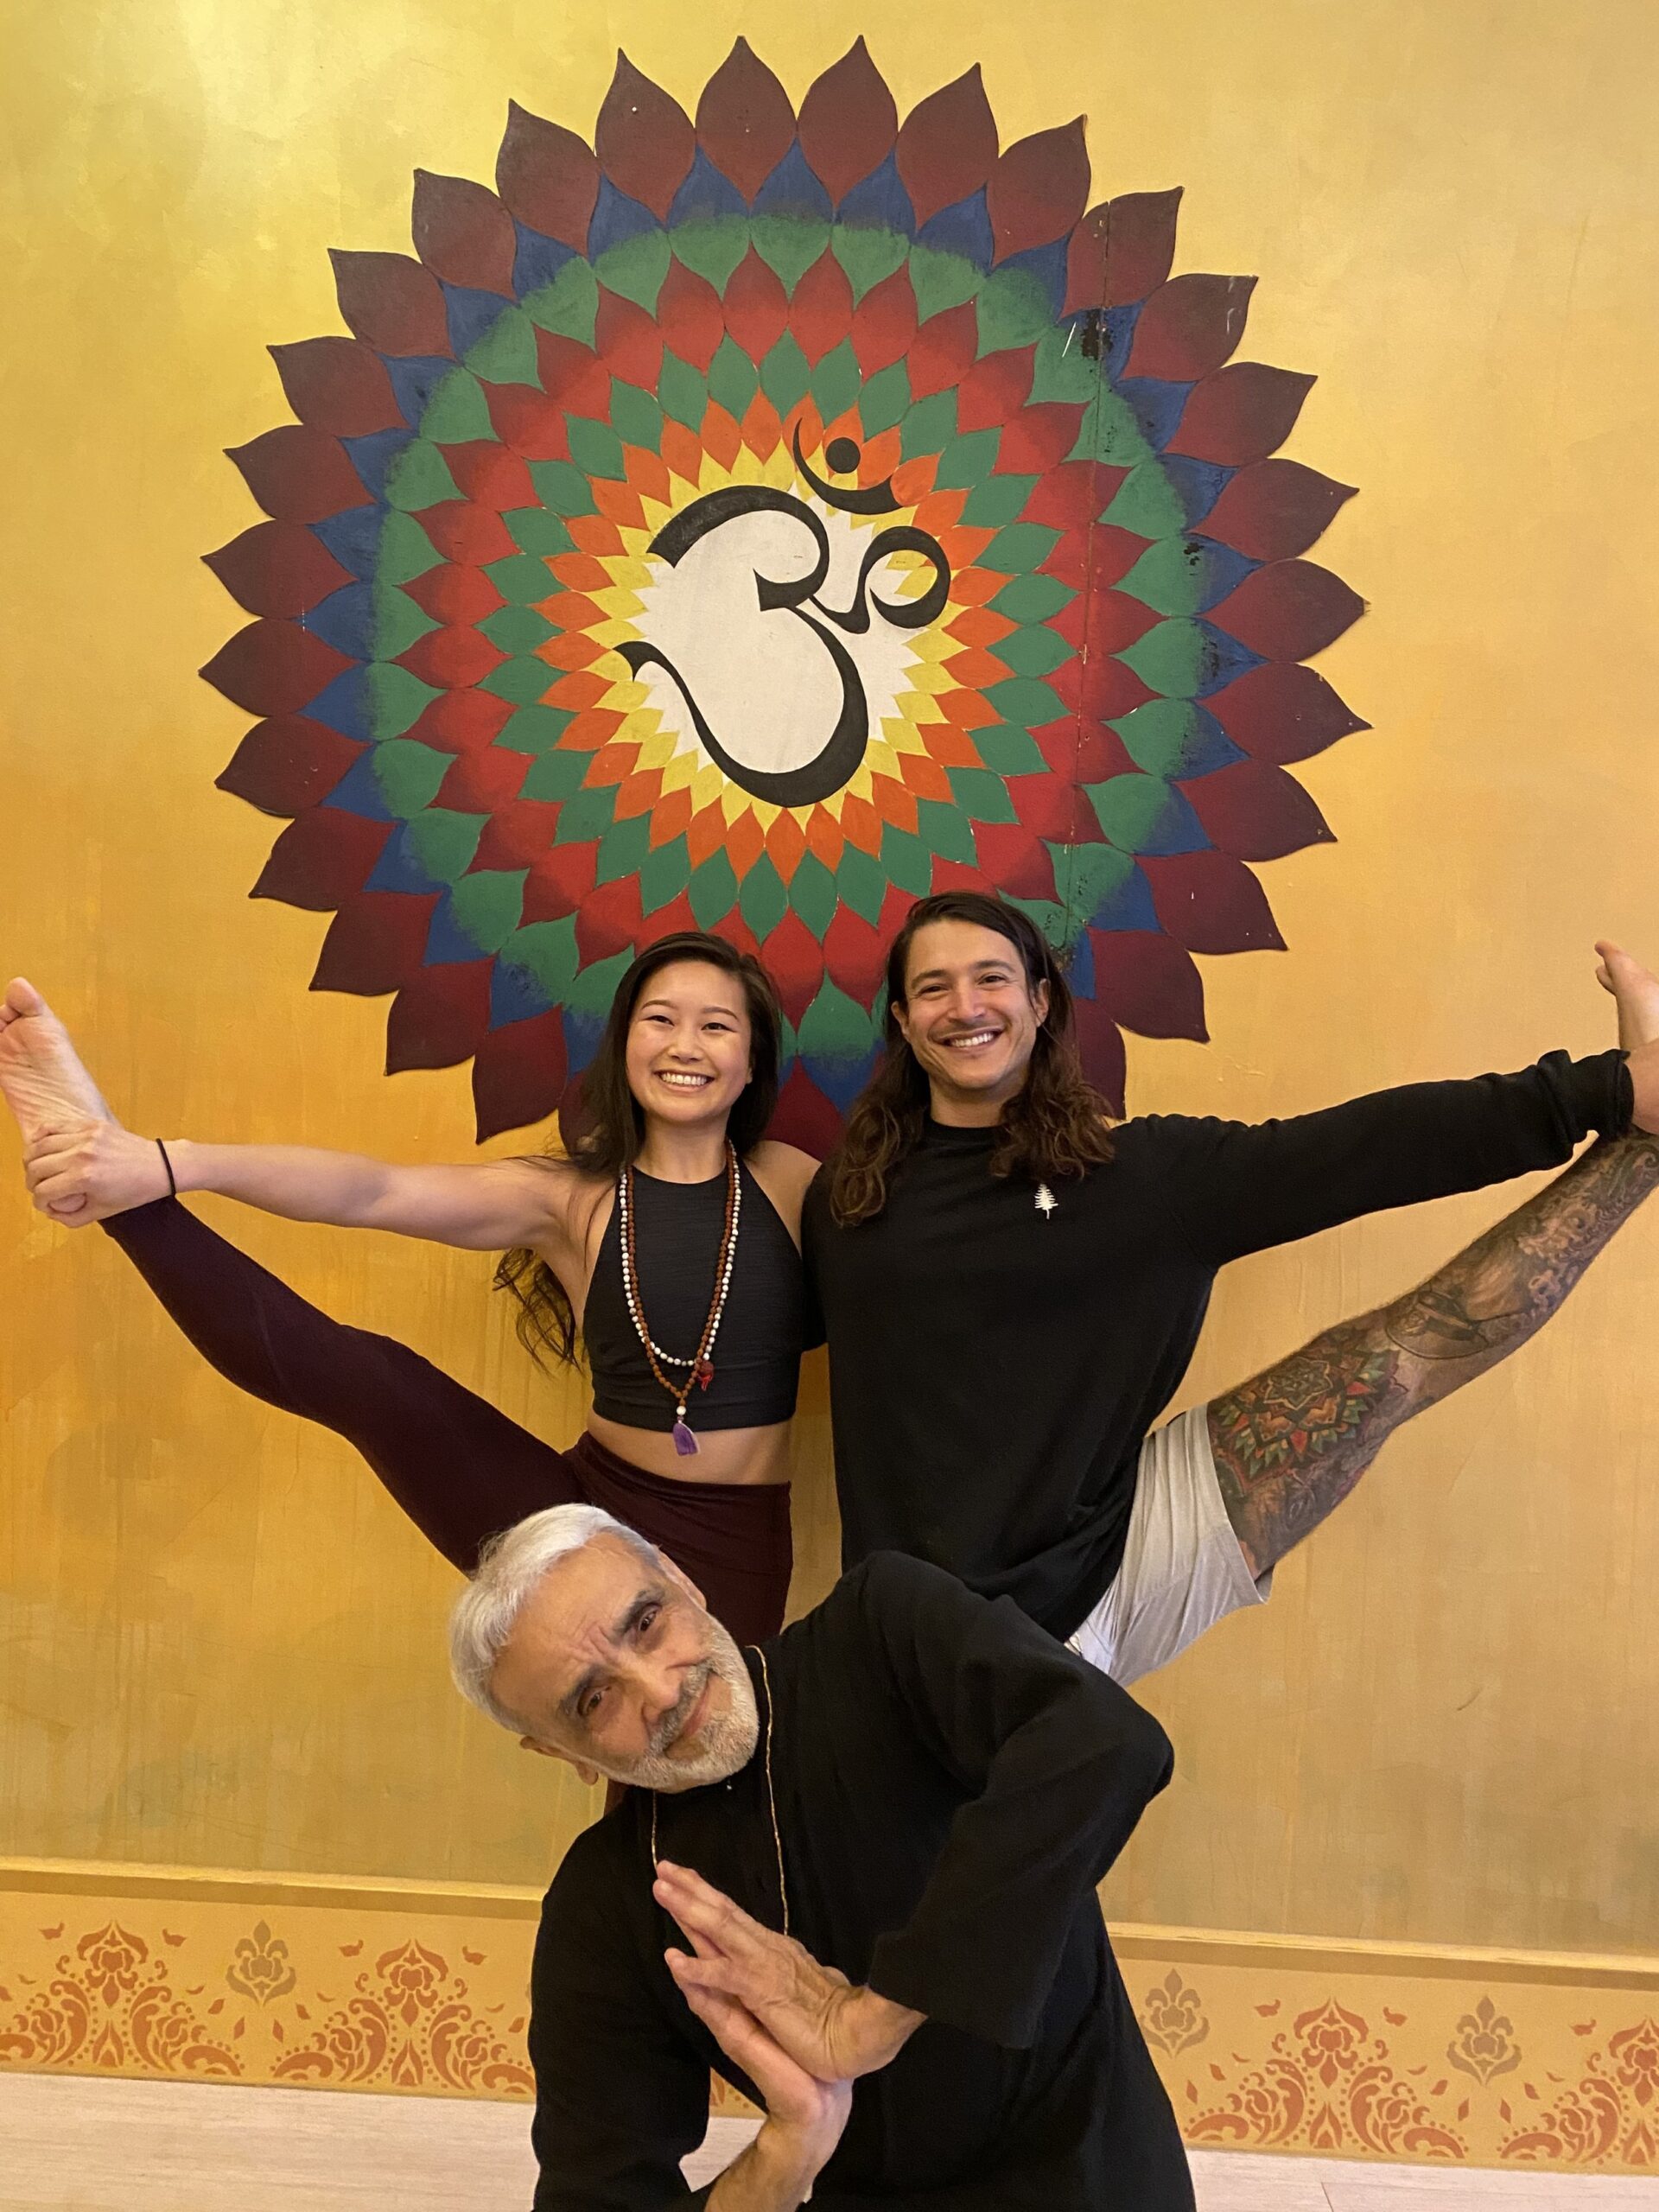 Yoga instructor Sri Dharma Mittra demonstrating a twist pose in front of Jessica Hwang and Rob Mendez holding ballet pose together, with a large Om symbol mural in the background of a serene yoga studio.